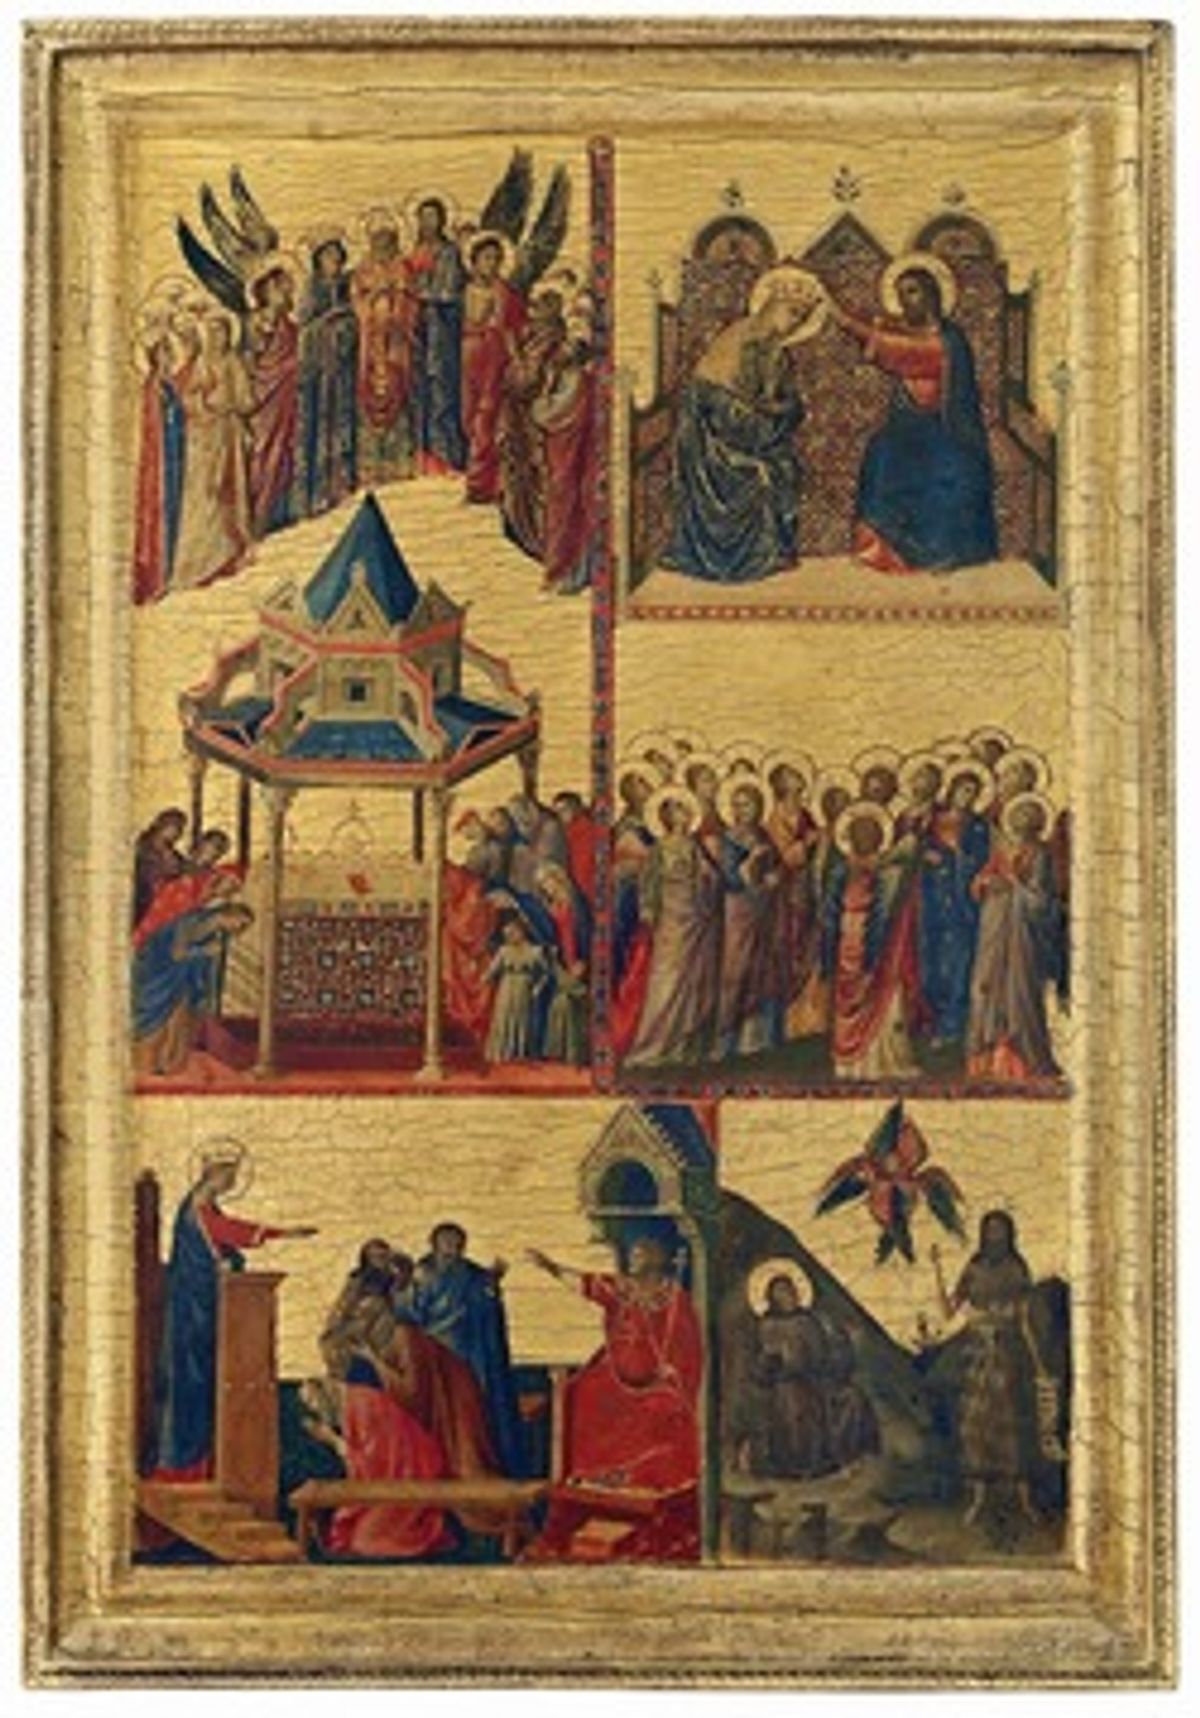 Giovanni da Rimini, Scenes from the Lives of the Virgin and other Saints (around 1300-1305) (© The National Gallery, London)